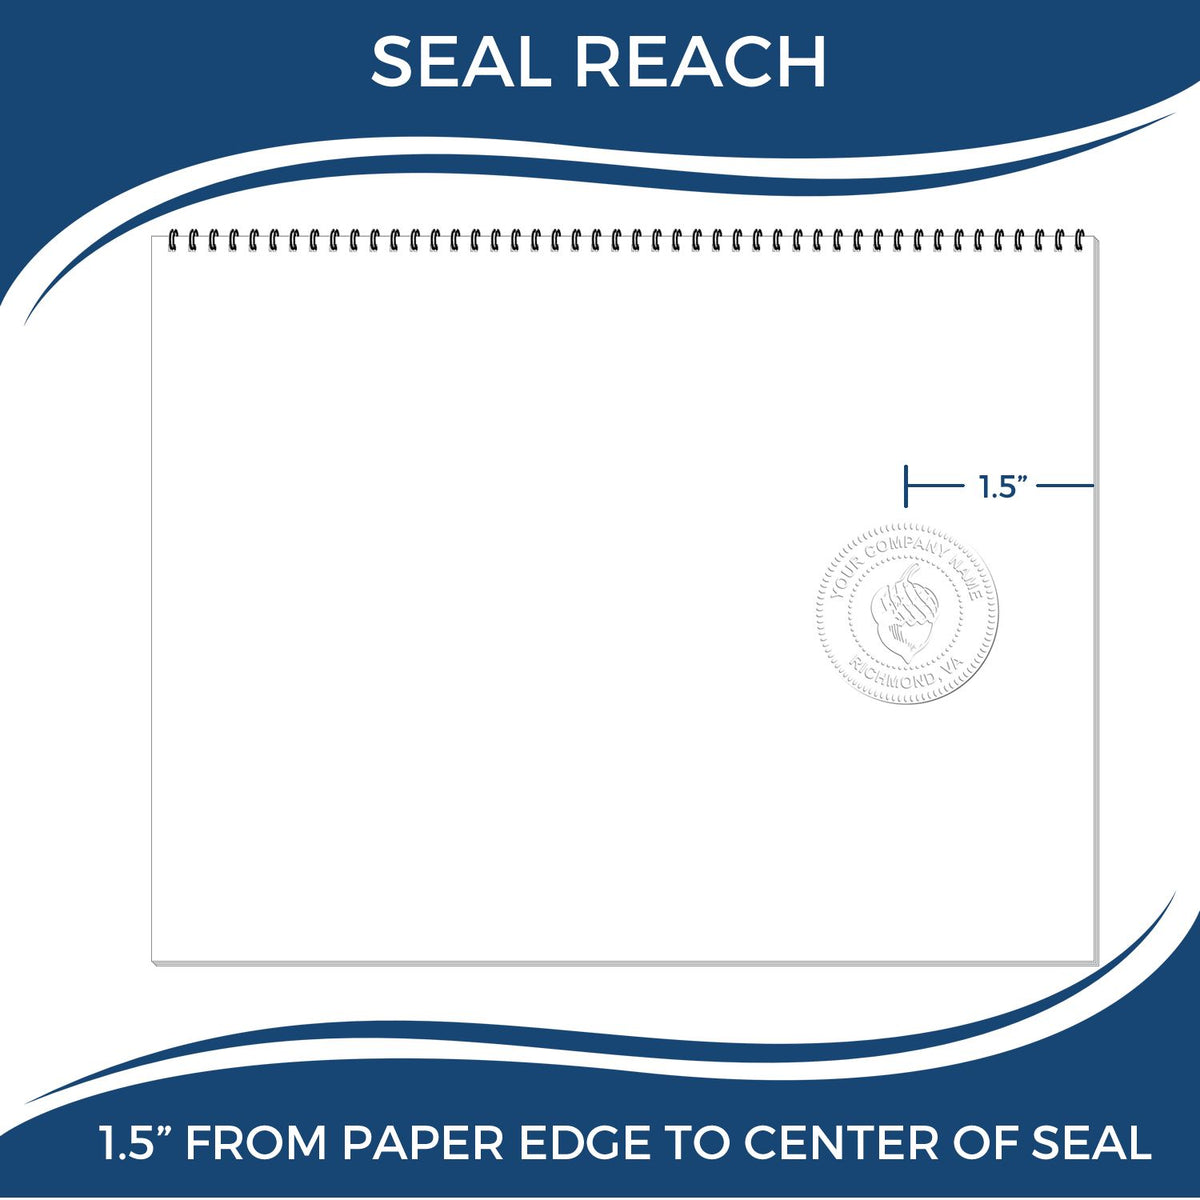 An infographic showing the seal reach which is represented by a ruler and a miniature seal image of the Hybrid Texas Land Surveyor Seal